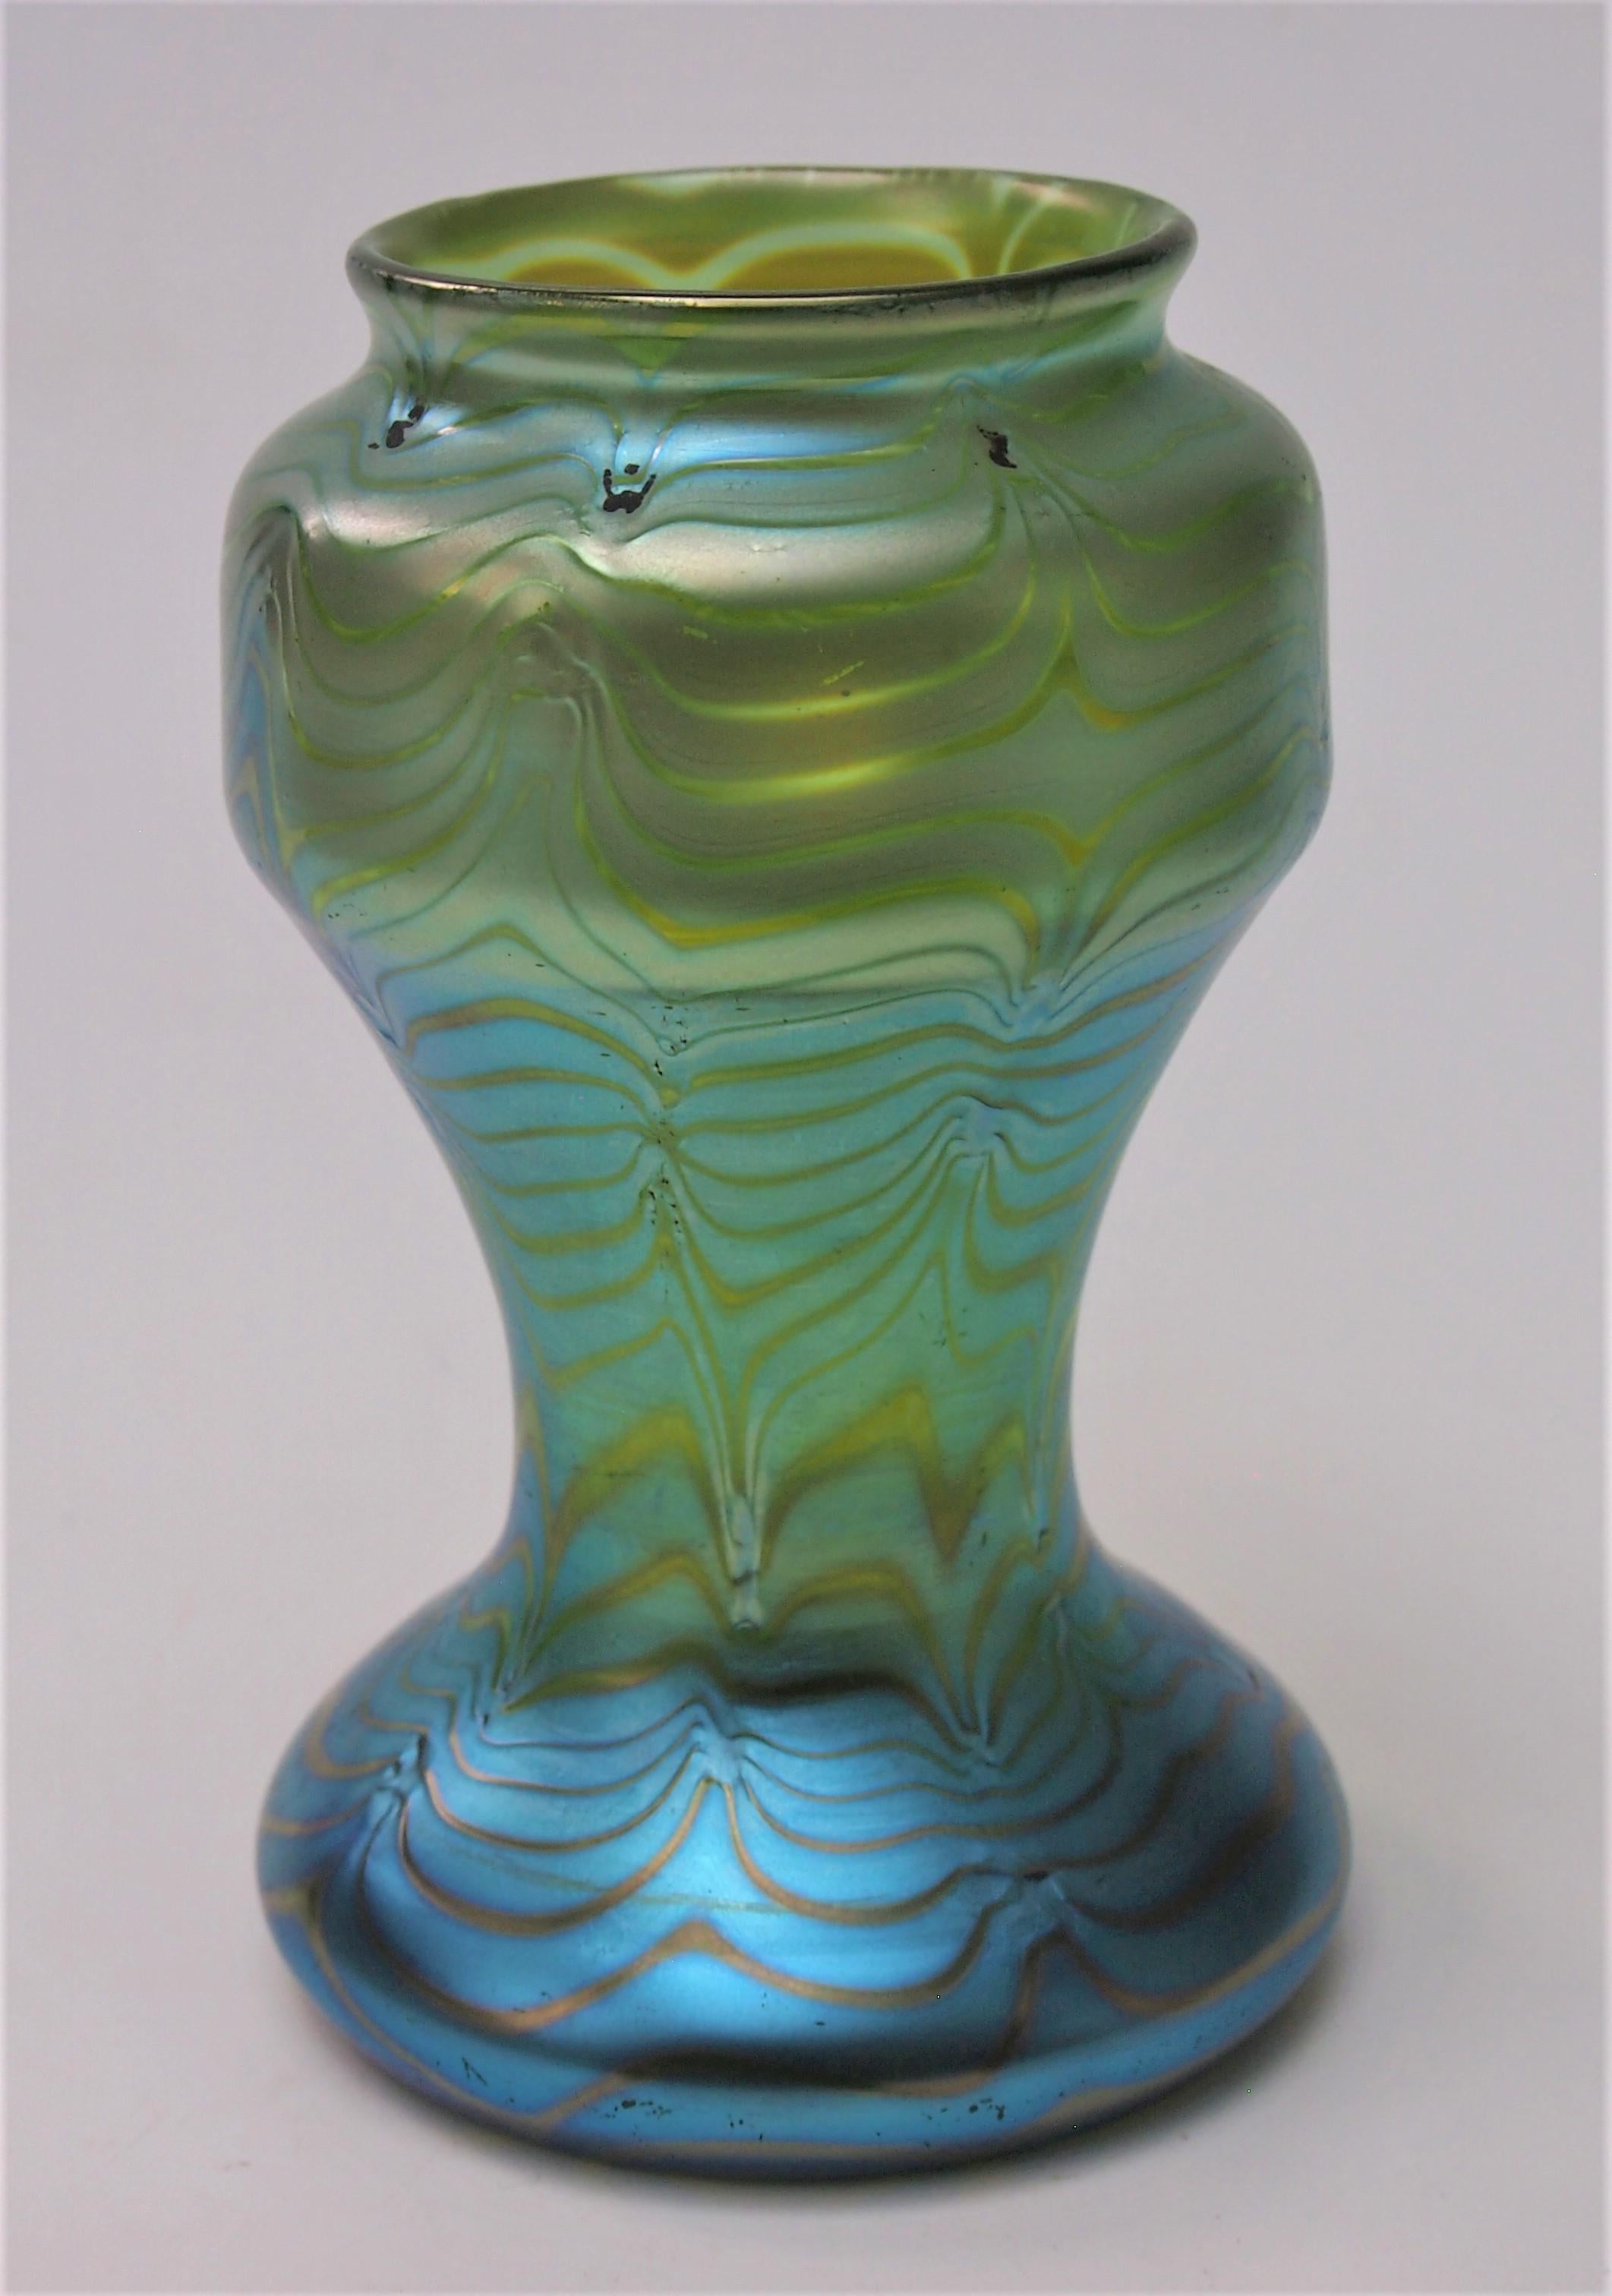 Fabulous example of a Loetz Phaenomen crete (green based) vase ref 85/3780 made c1902. The green vase is covered in Silver-blue feathering, which has been hand tooled to give a wavy look -note the tooling marks leave minor 'frit' deposits (black